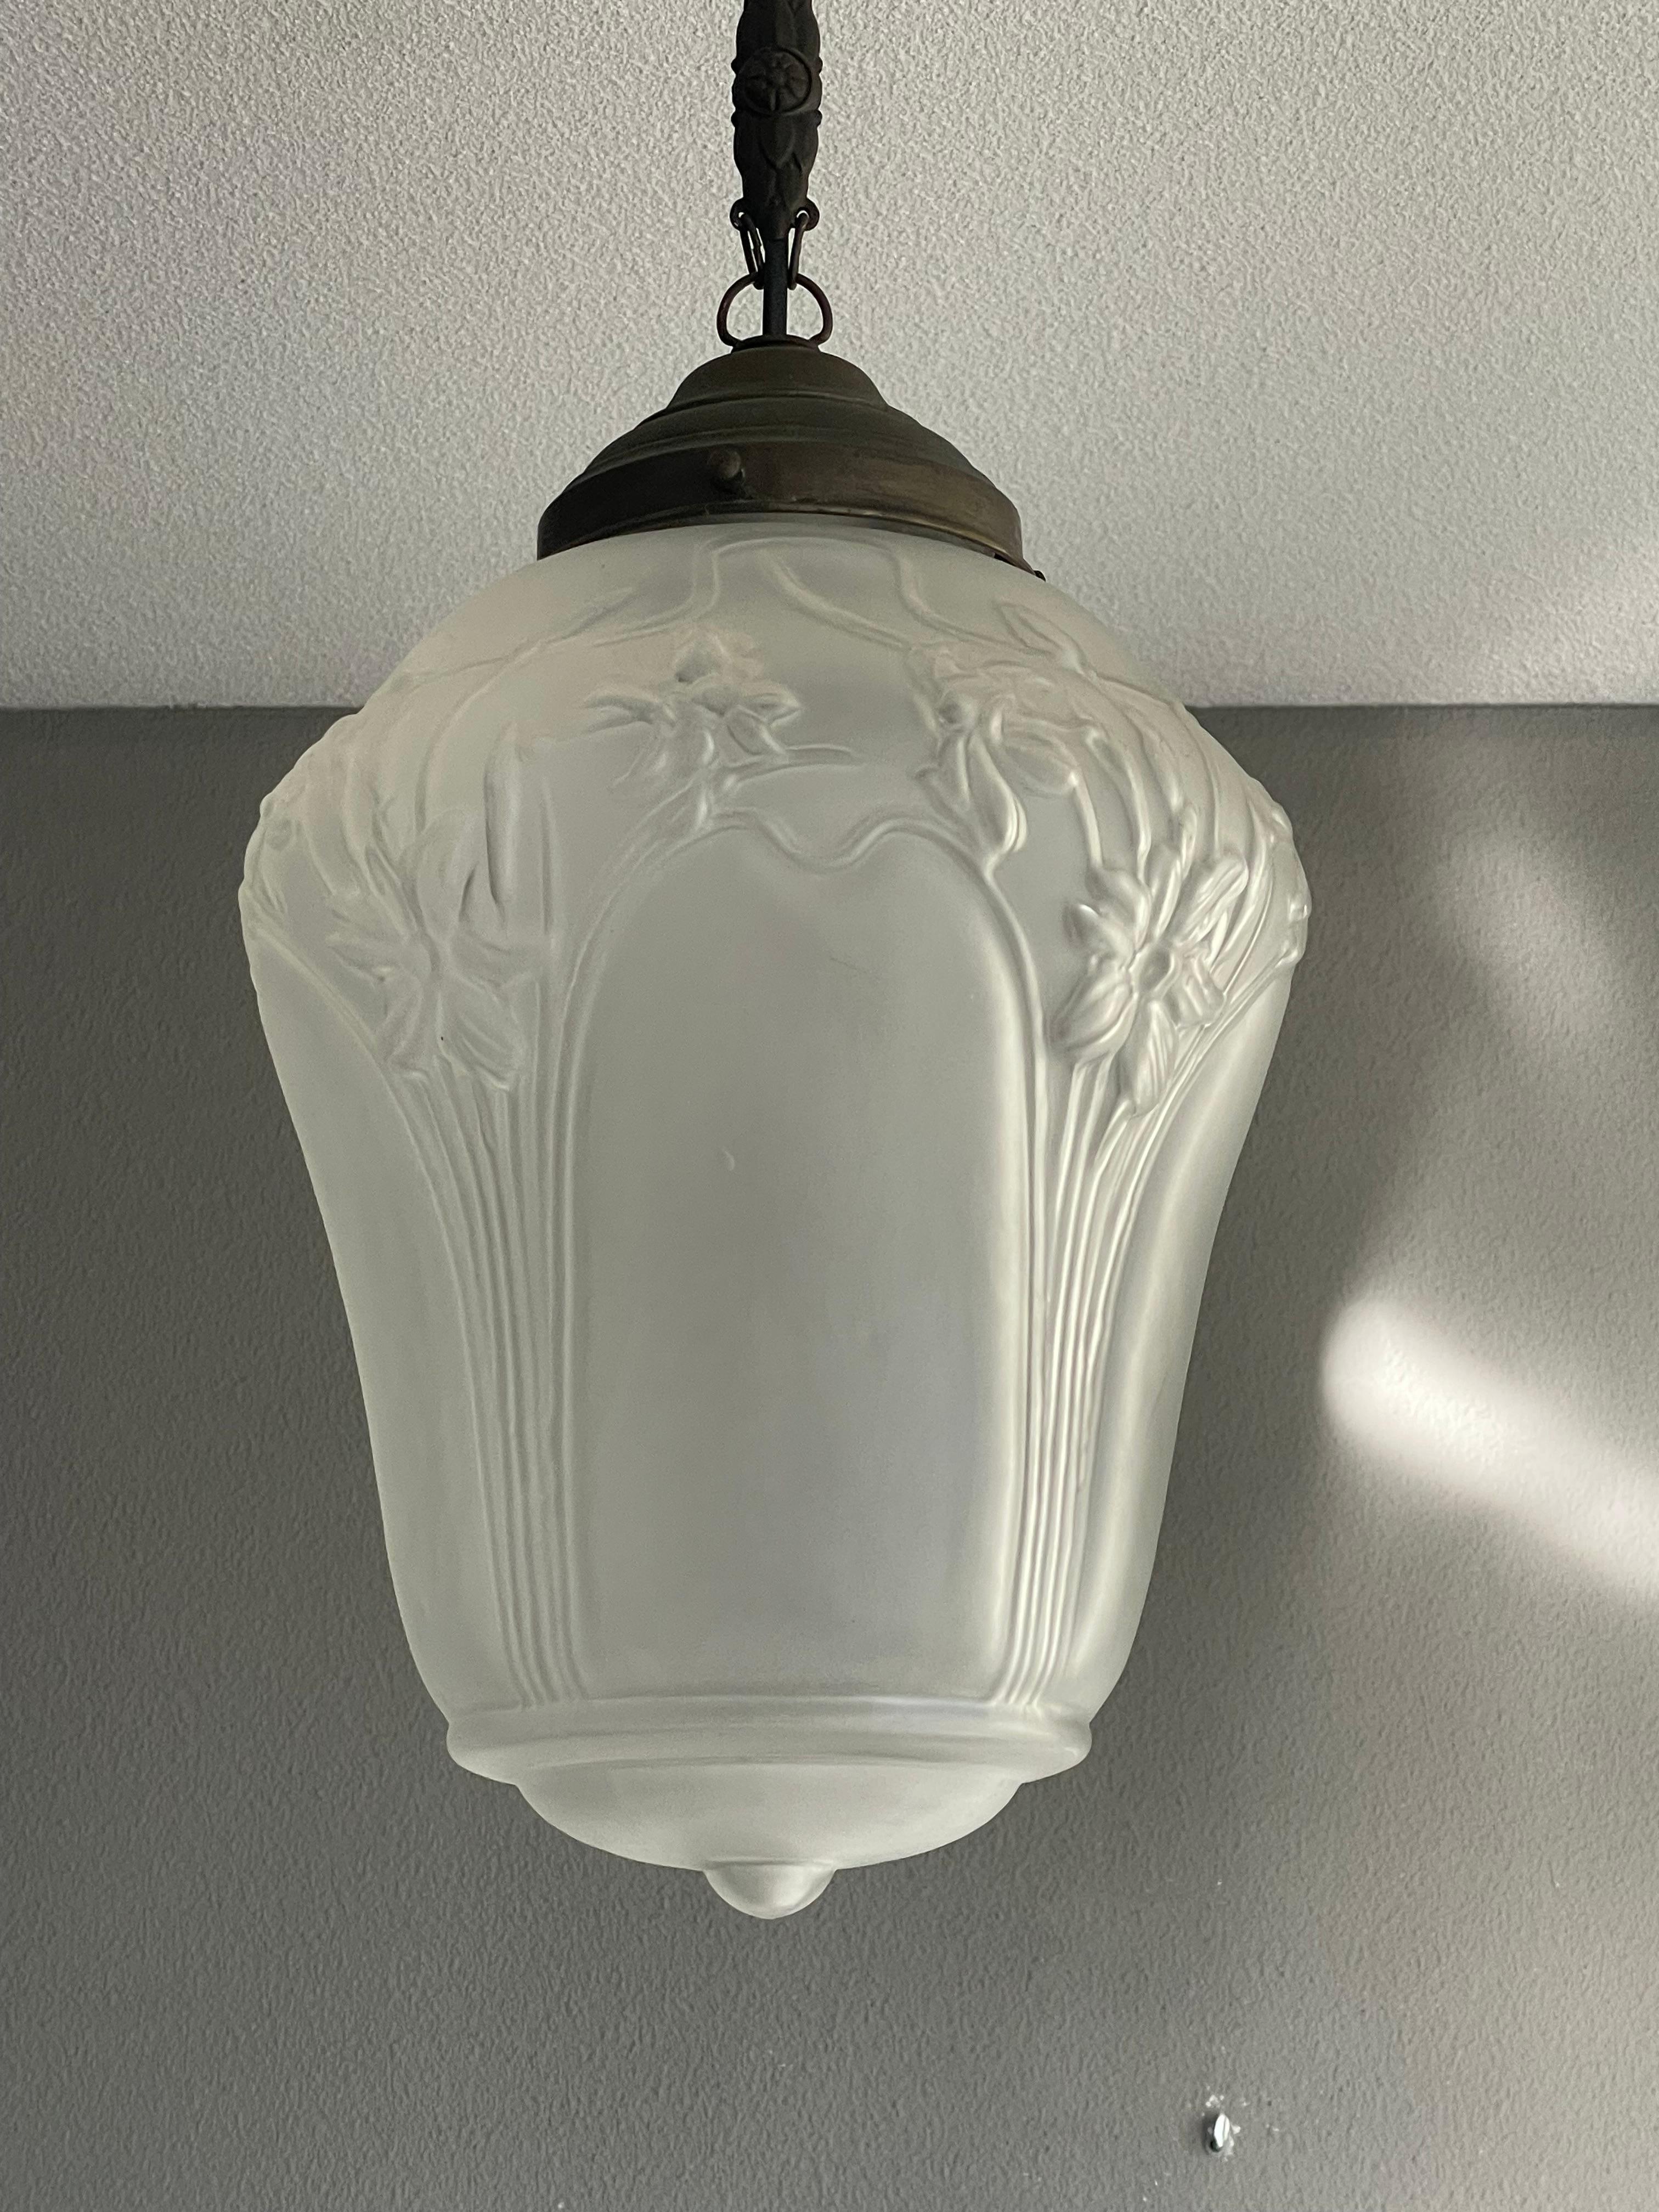 Original Arts and Crafts Glass Hallway Pendant Light with Daffodil Flowers 1900s For Sale 7